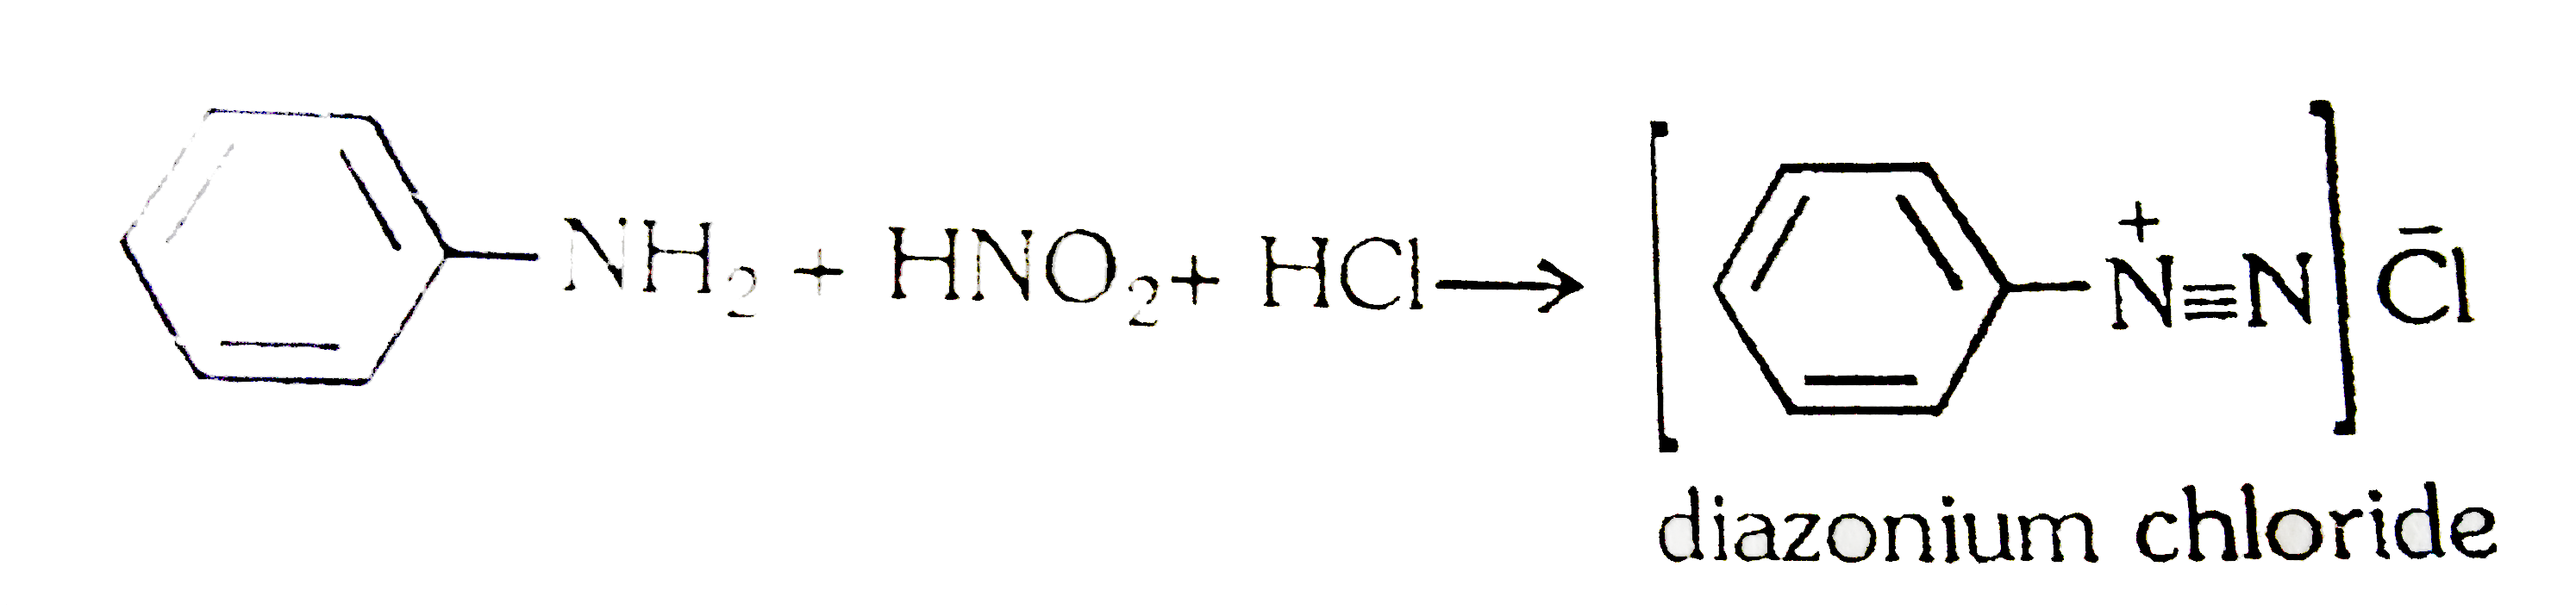 Diazonium salt formation and coupling reaction: When a reaction mixture of phenyl amine and nitrous acid is kept below 10^(@)C, a diazonium salt is formed. This reaction is called diazotization reaction.      The diazonium ion, -N(2)^(+), is rather unstable and decomposes readily to nitrogen. However, delocalization of the diazonium from pi-bond electron over a benzene ring phenyl diazonium sufficiently for it to form at low temperature. The phenyl diazonium ion behaves as an electrophile, and will attack another arene molecule such as phenol. Electrophilic subsitiution takes at the 4 position, producing 4-hydroxy phenyl azobenzene. The reaction is known as coupling reaction.      The compound formed is an energetically stable, yellow azo dye (the azo group is -N=N-) The stability is due to extensive delocalisation of electrons via the nitrogen- nitrogen double bonds.    Benzene diazonium chloride on reaction with phenol in weakly basic medium gives :